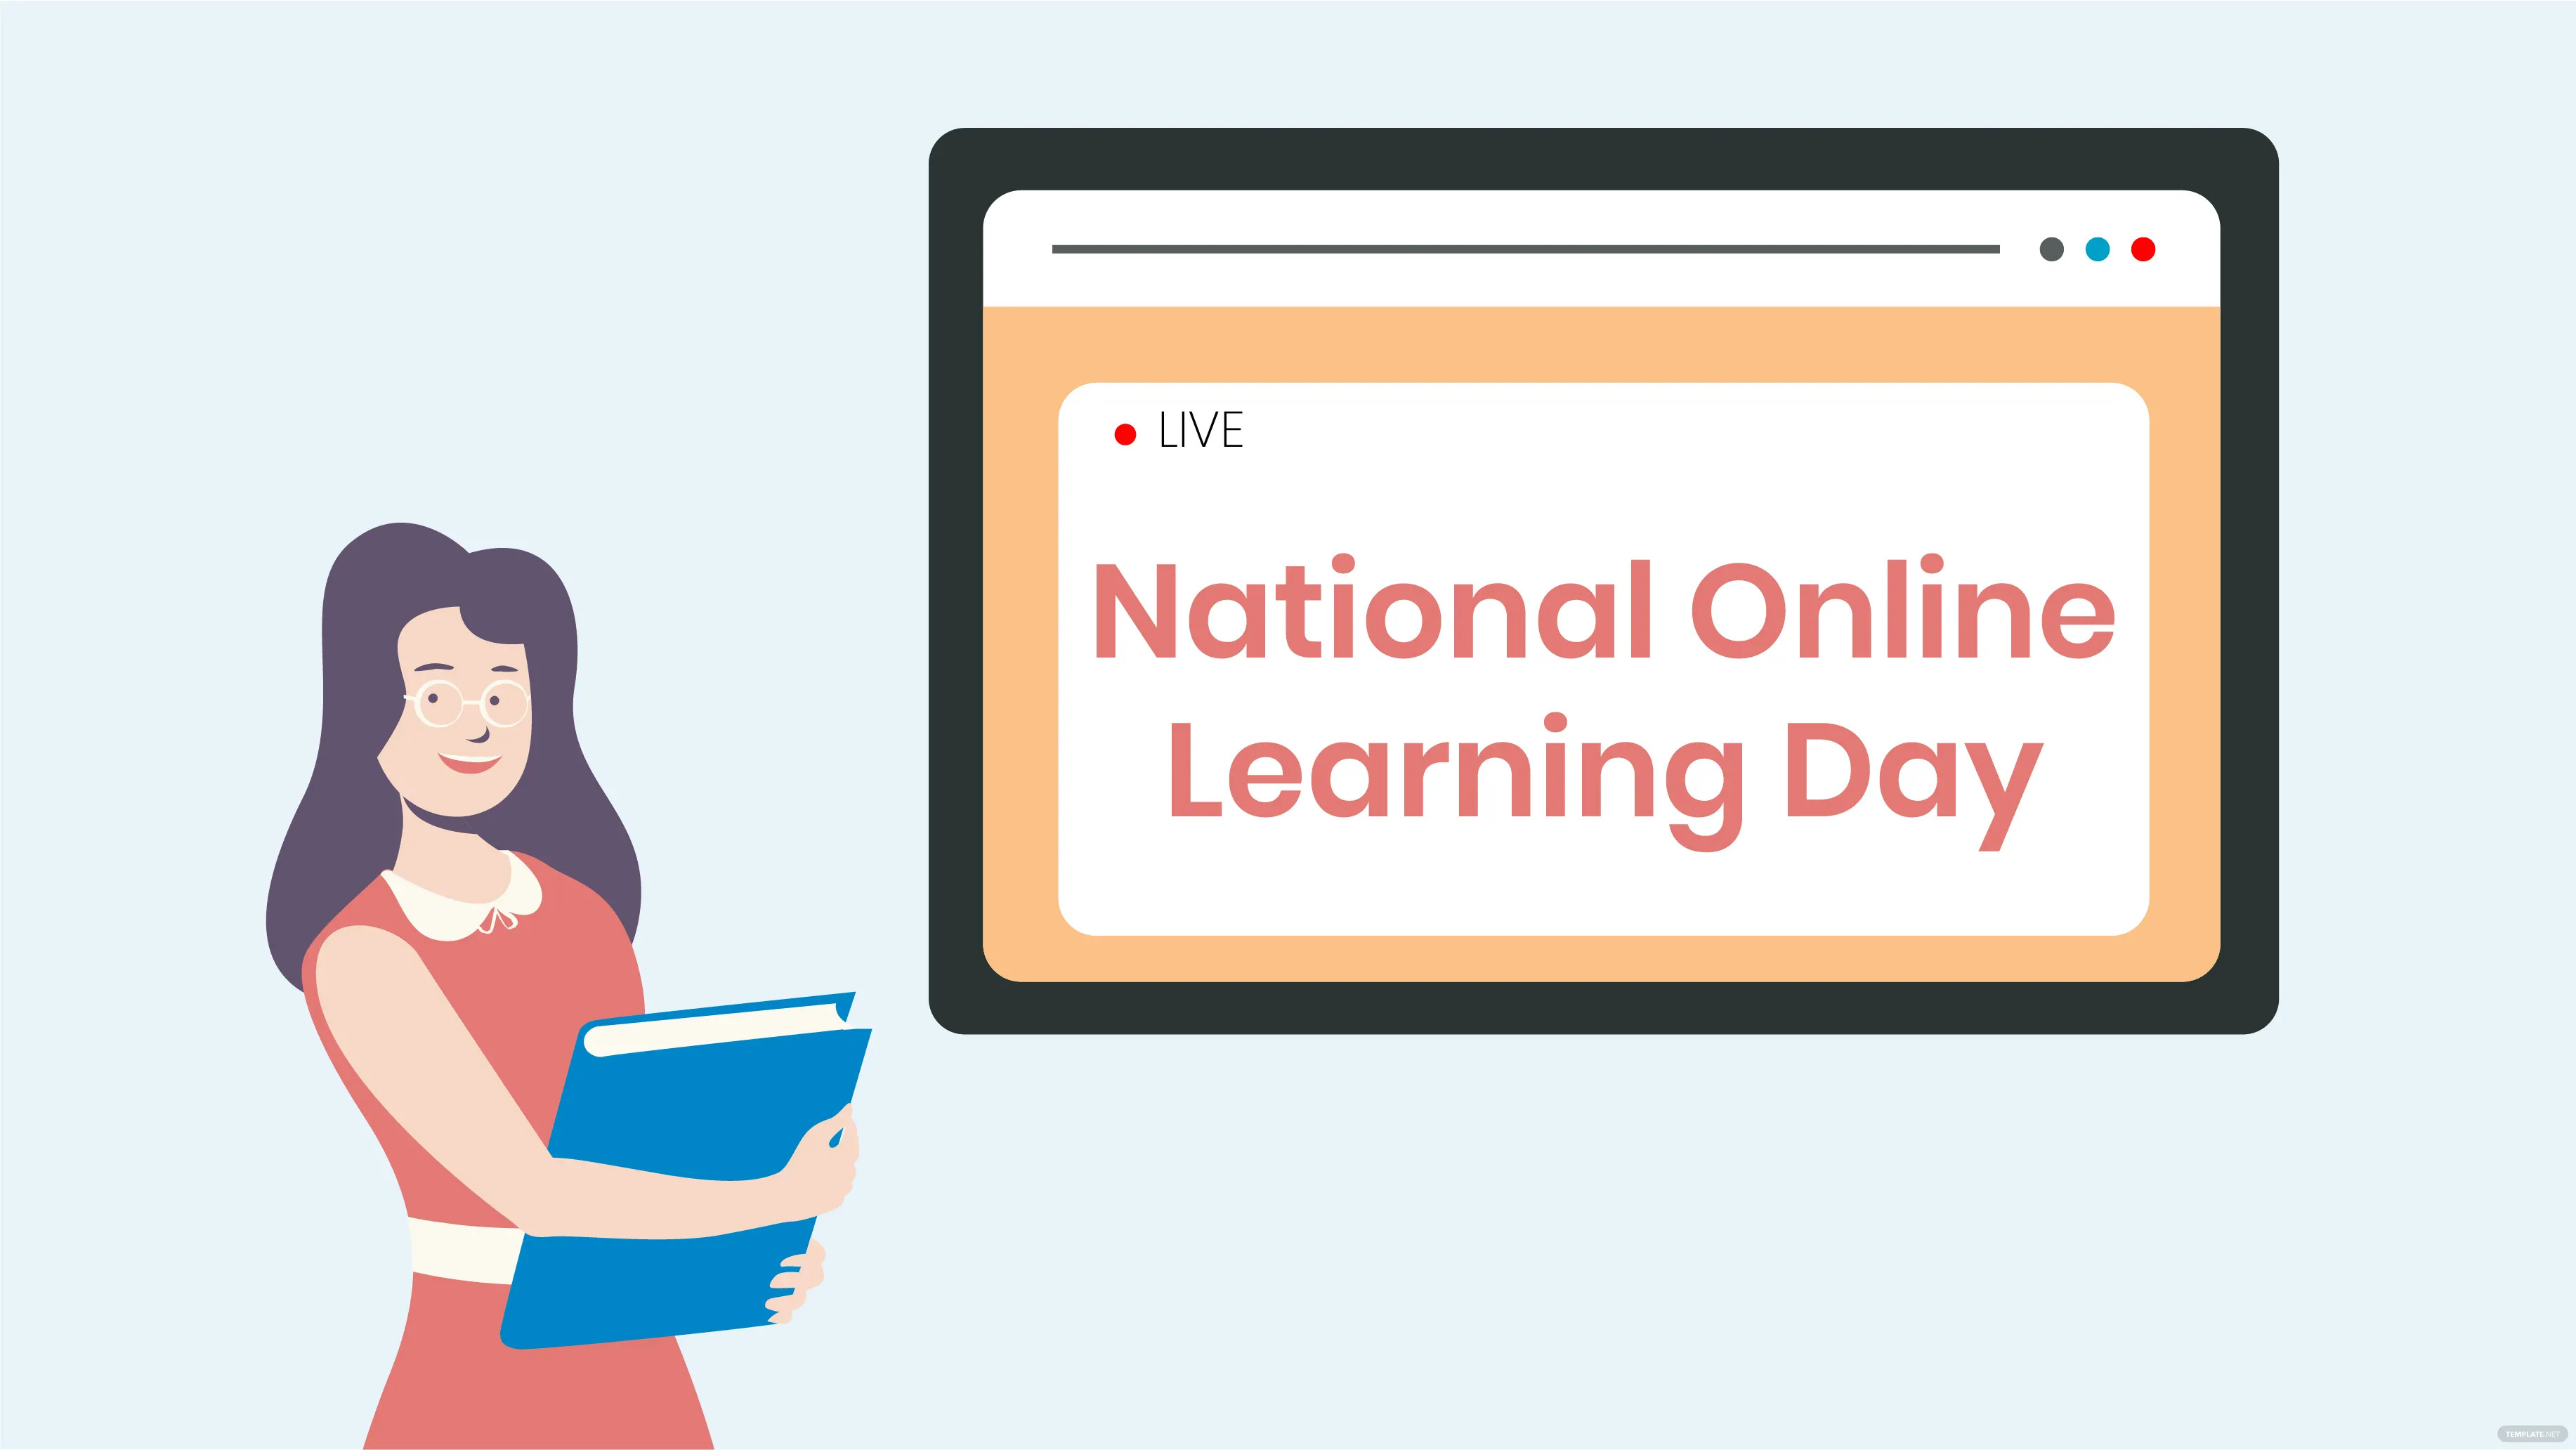 National Online Learning Day When is National Online Learning Day